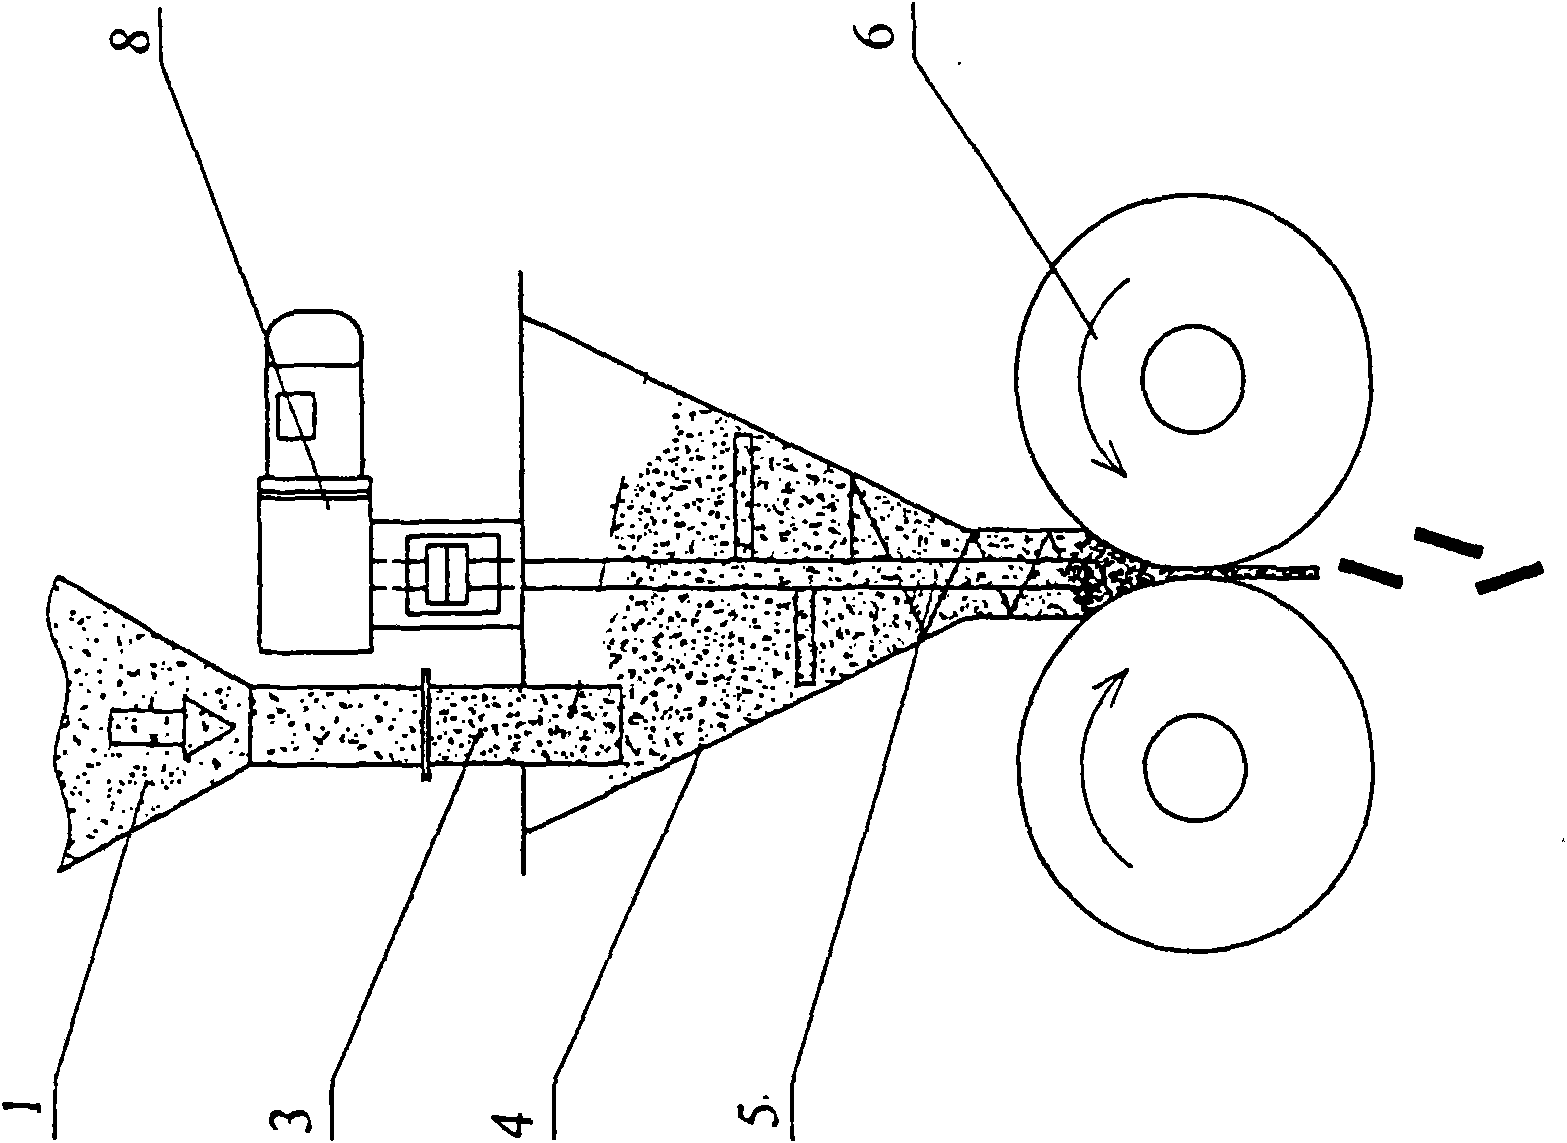 Double-roller type extruding and granulation device and granulation process flow thereof